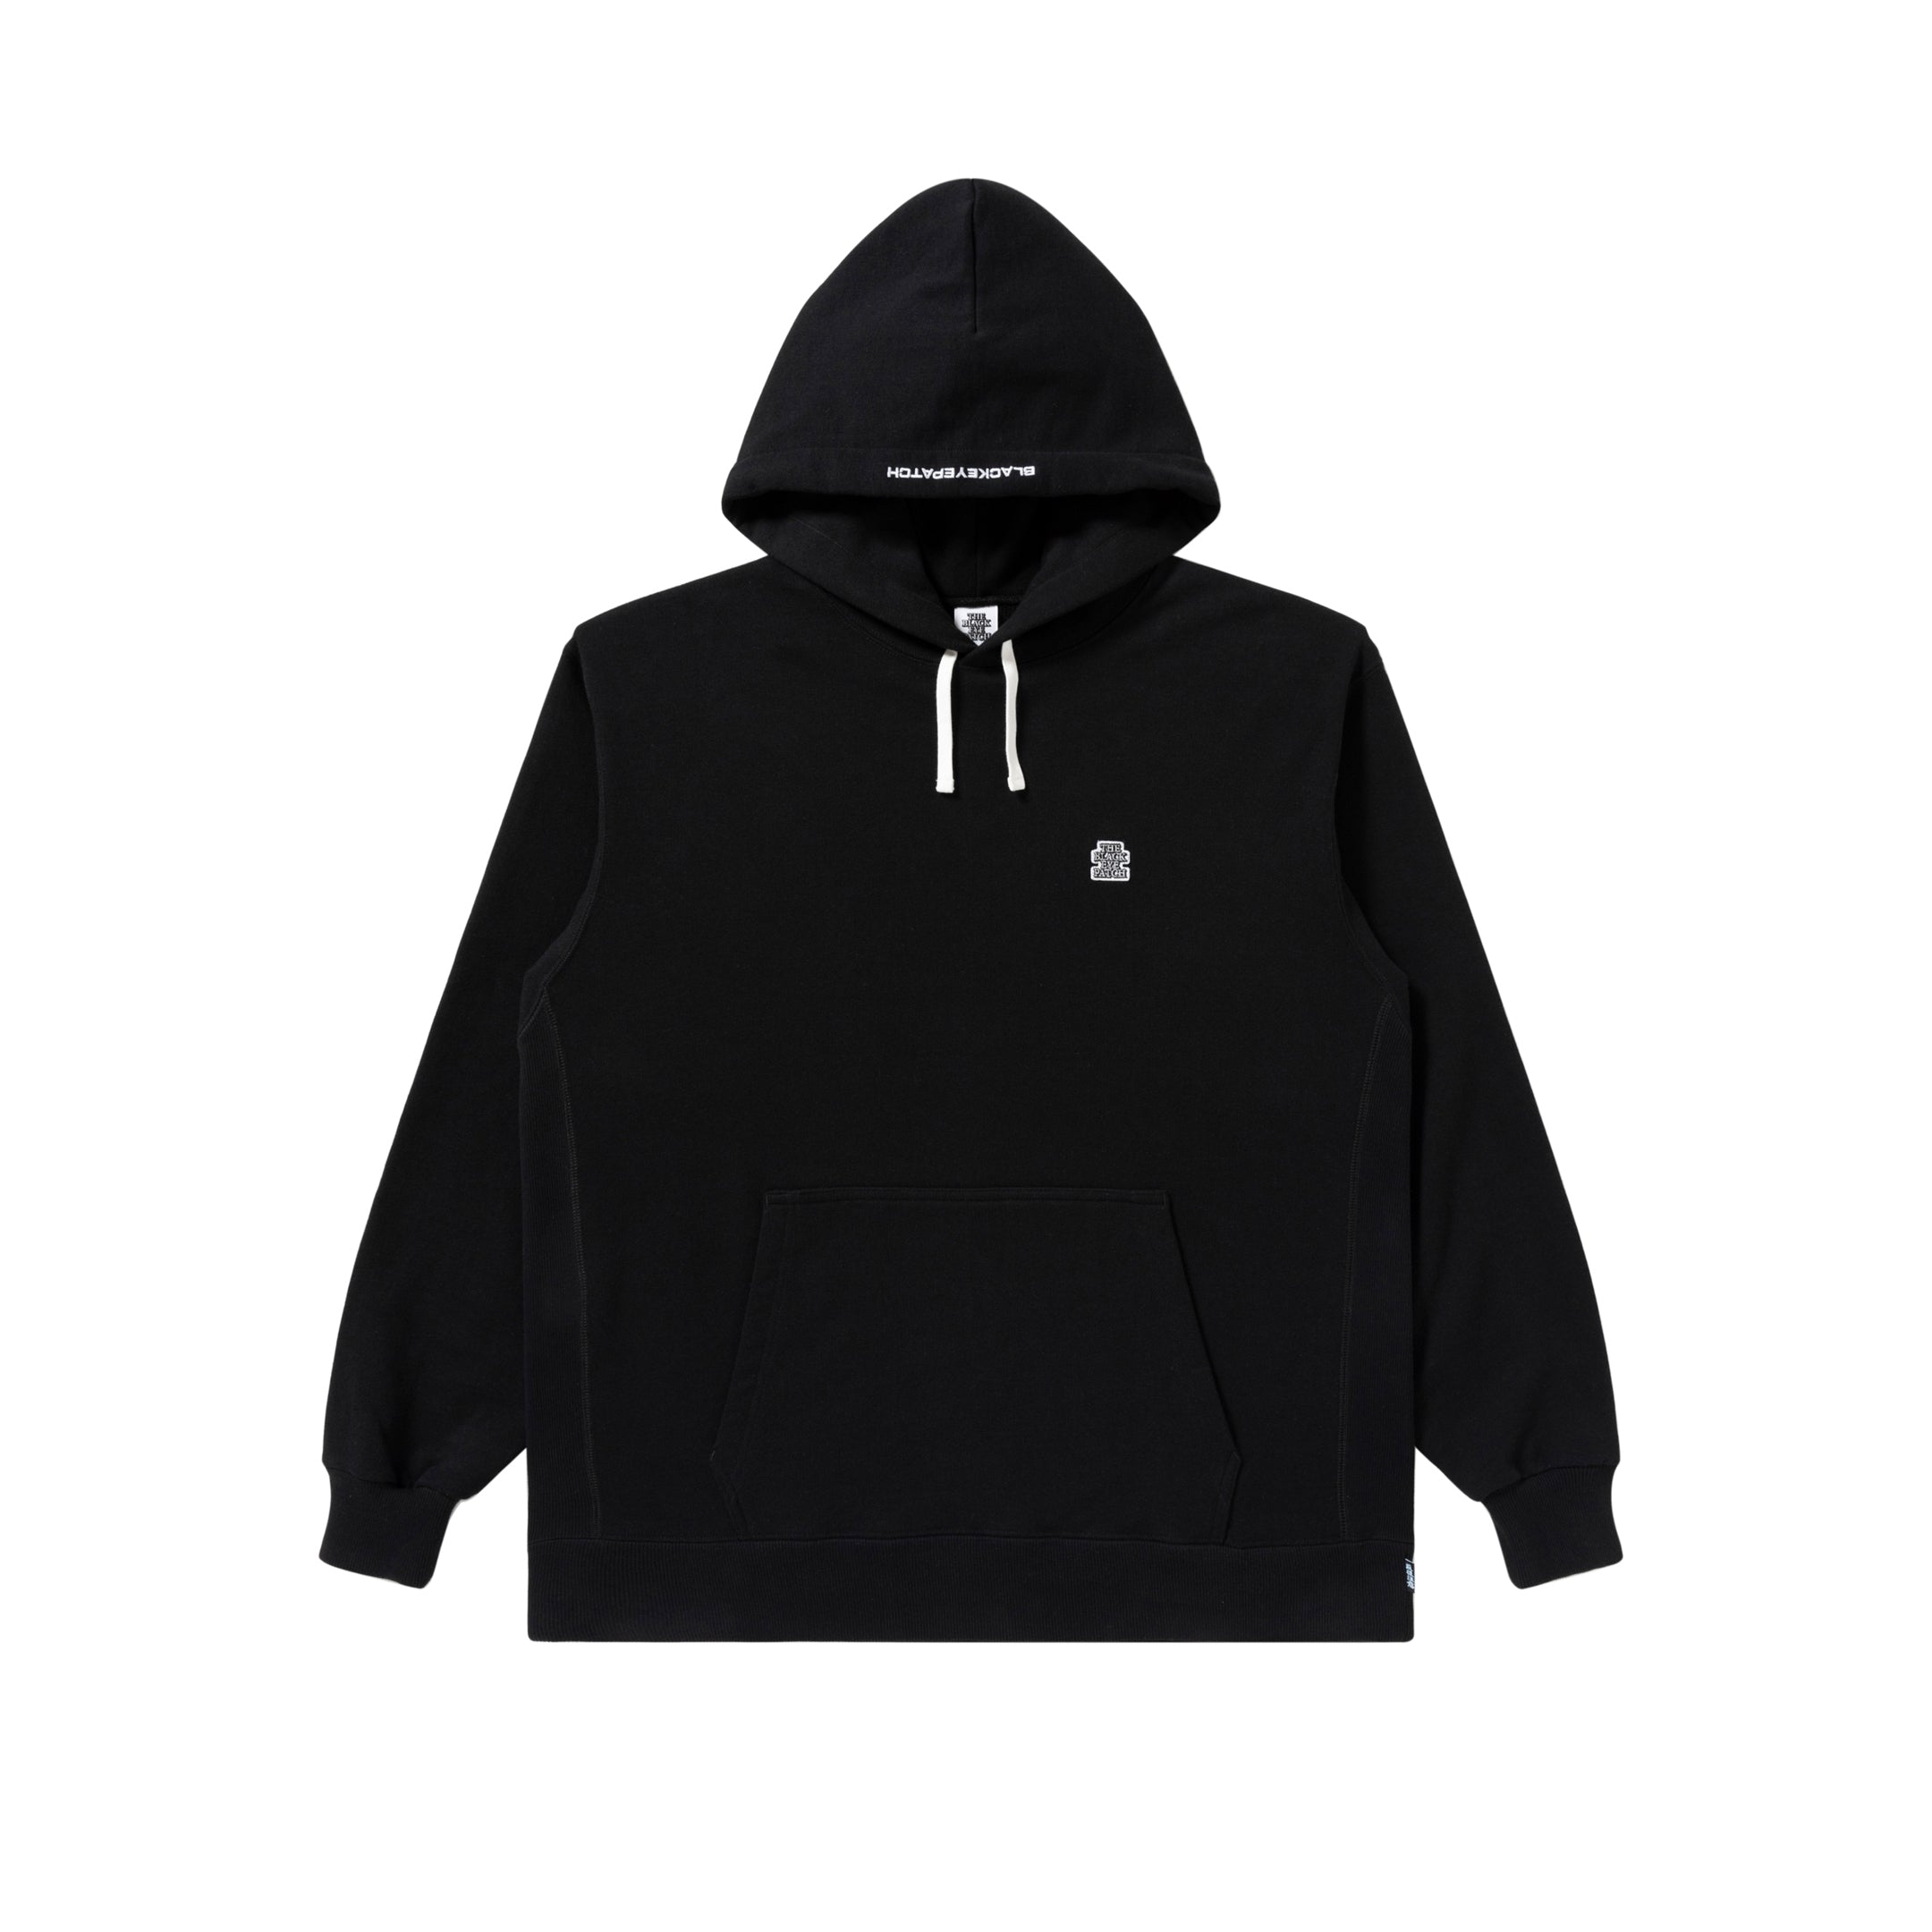 THE BLACK EYE PATCH OG LABEL HOODIE柄デザインプリント - パーカー